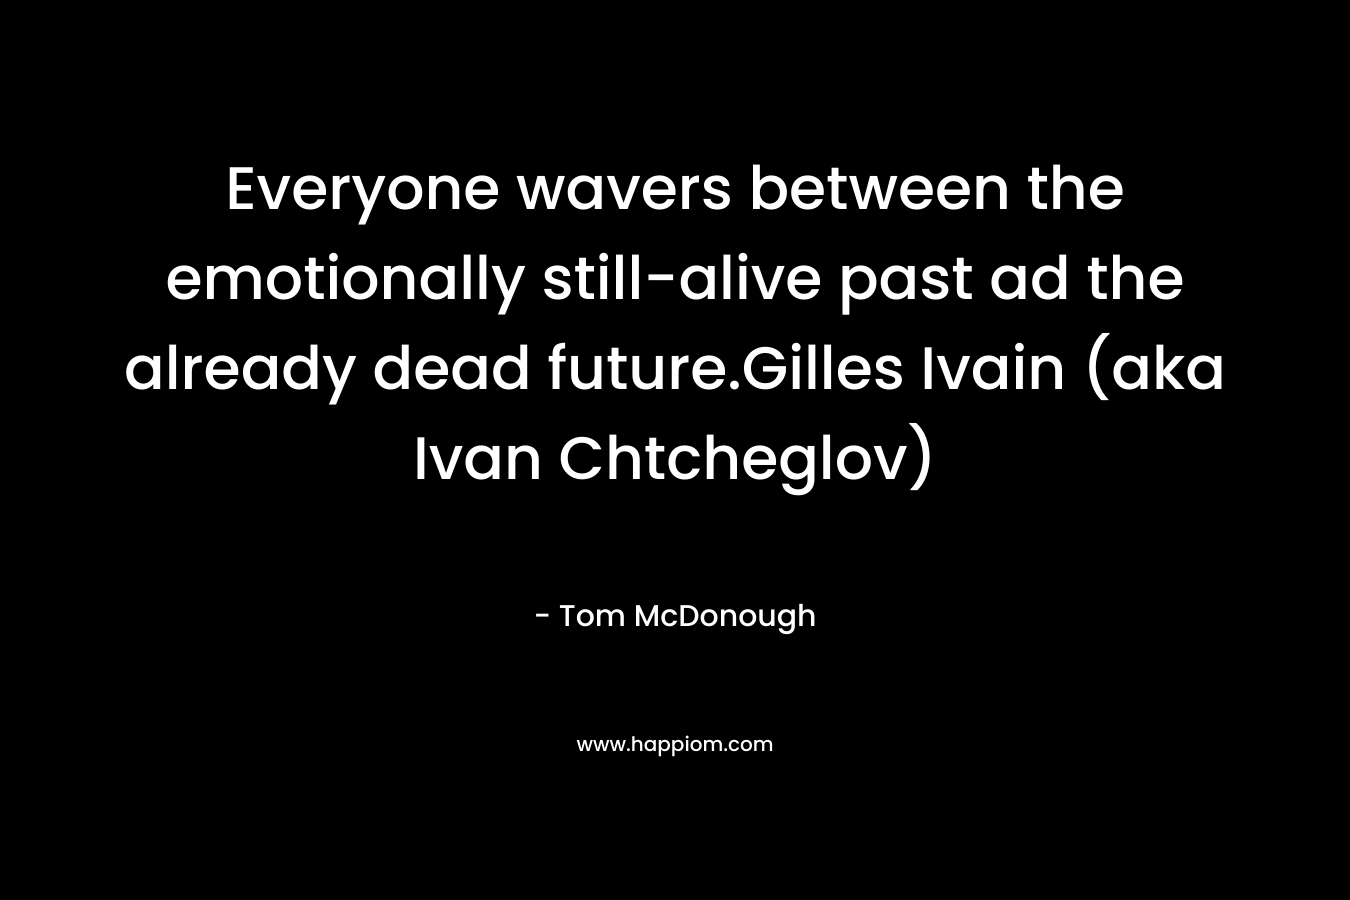 Everyone wavers between the emotionally still-alive past ad the already dead future.Gilles Ivain (aka Ivan Chtcheglov) – Tom McDonough